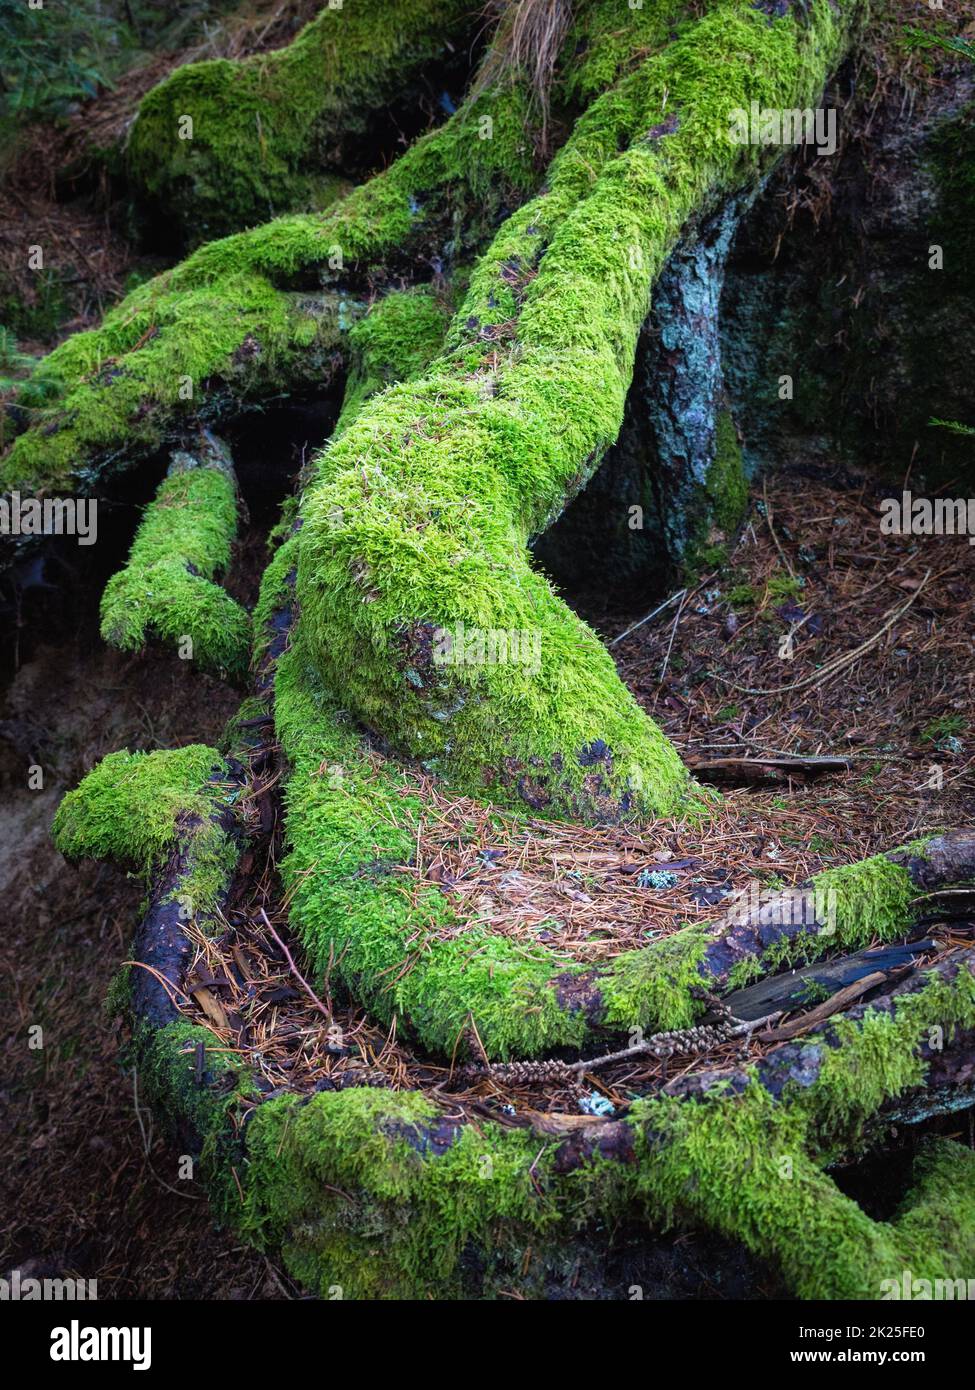 Strong, green roots of an old tree in a forest symbolizing strength and resilience Stock Photo